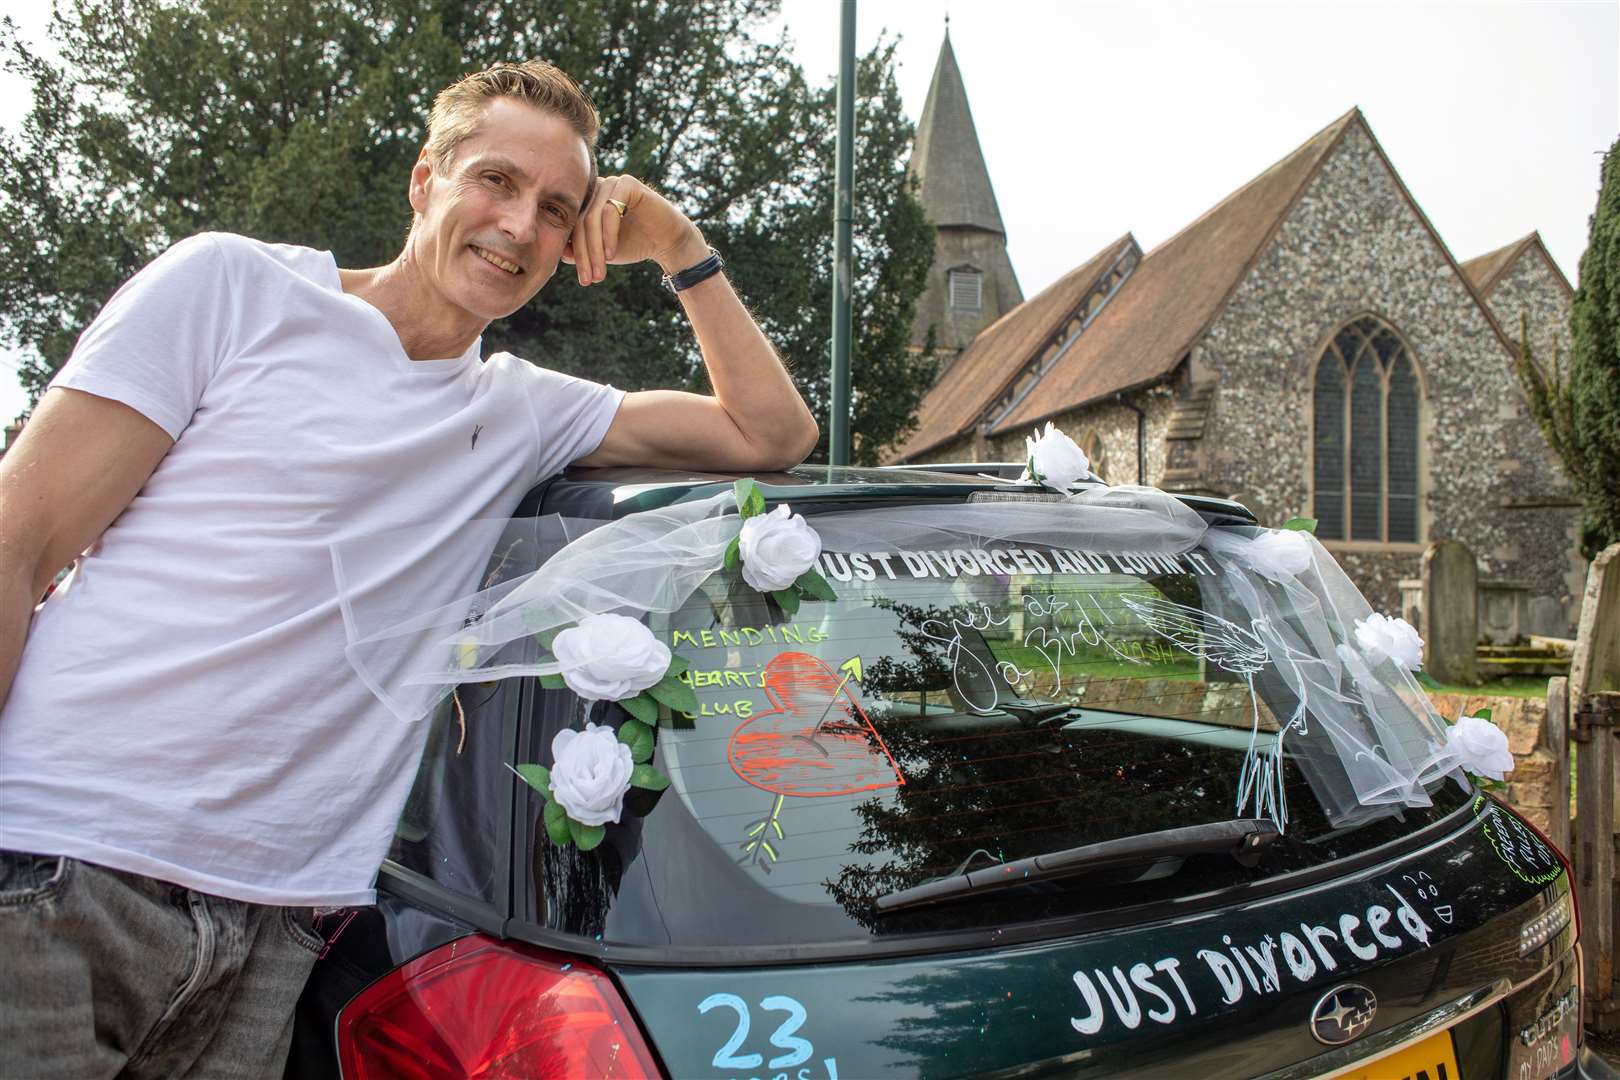 Author Angus Kennedy with his 'Just Divorced' car. Images: SWNS